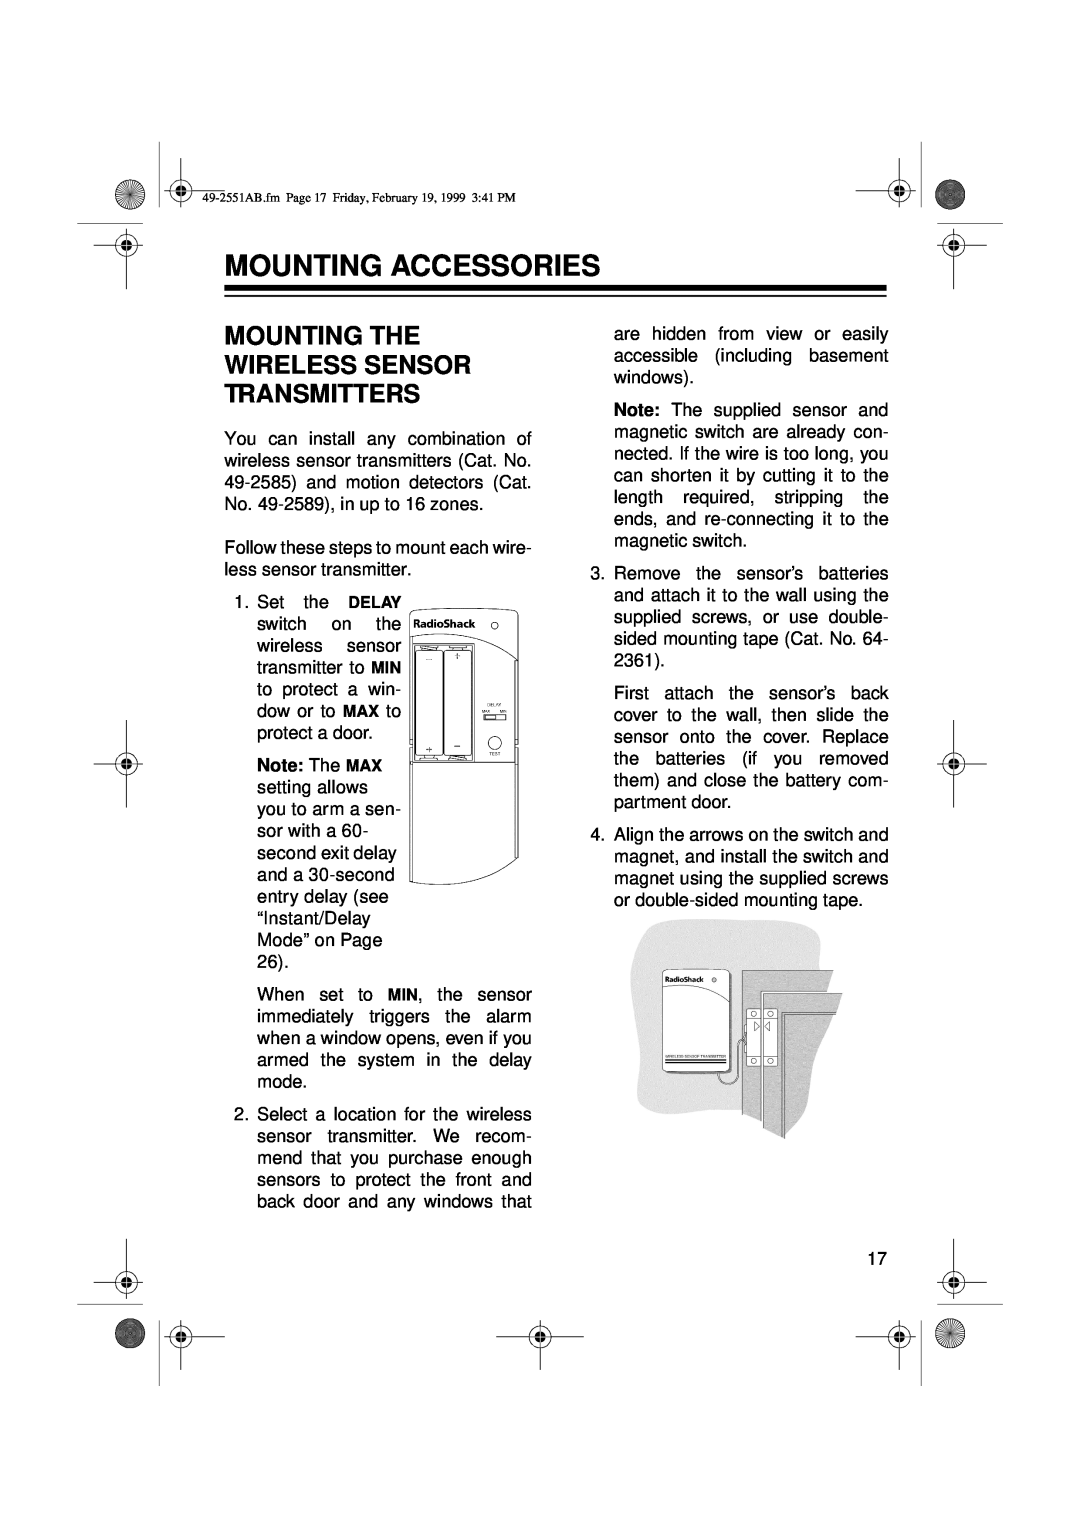 Radio Shack 49-2551A owner manual Mounting Accessories, Mounting The Wireless Sensor Transmitters 